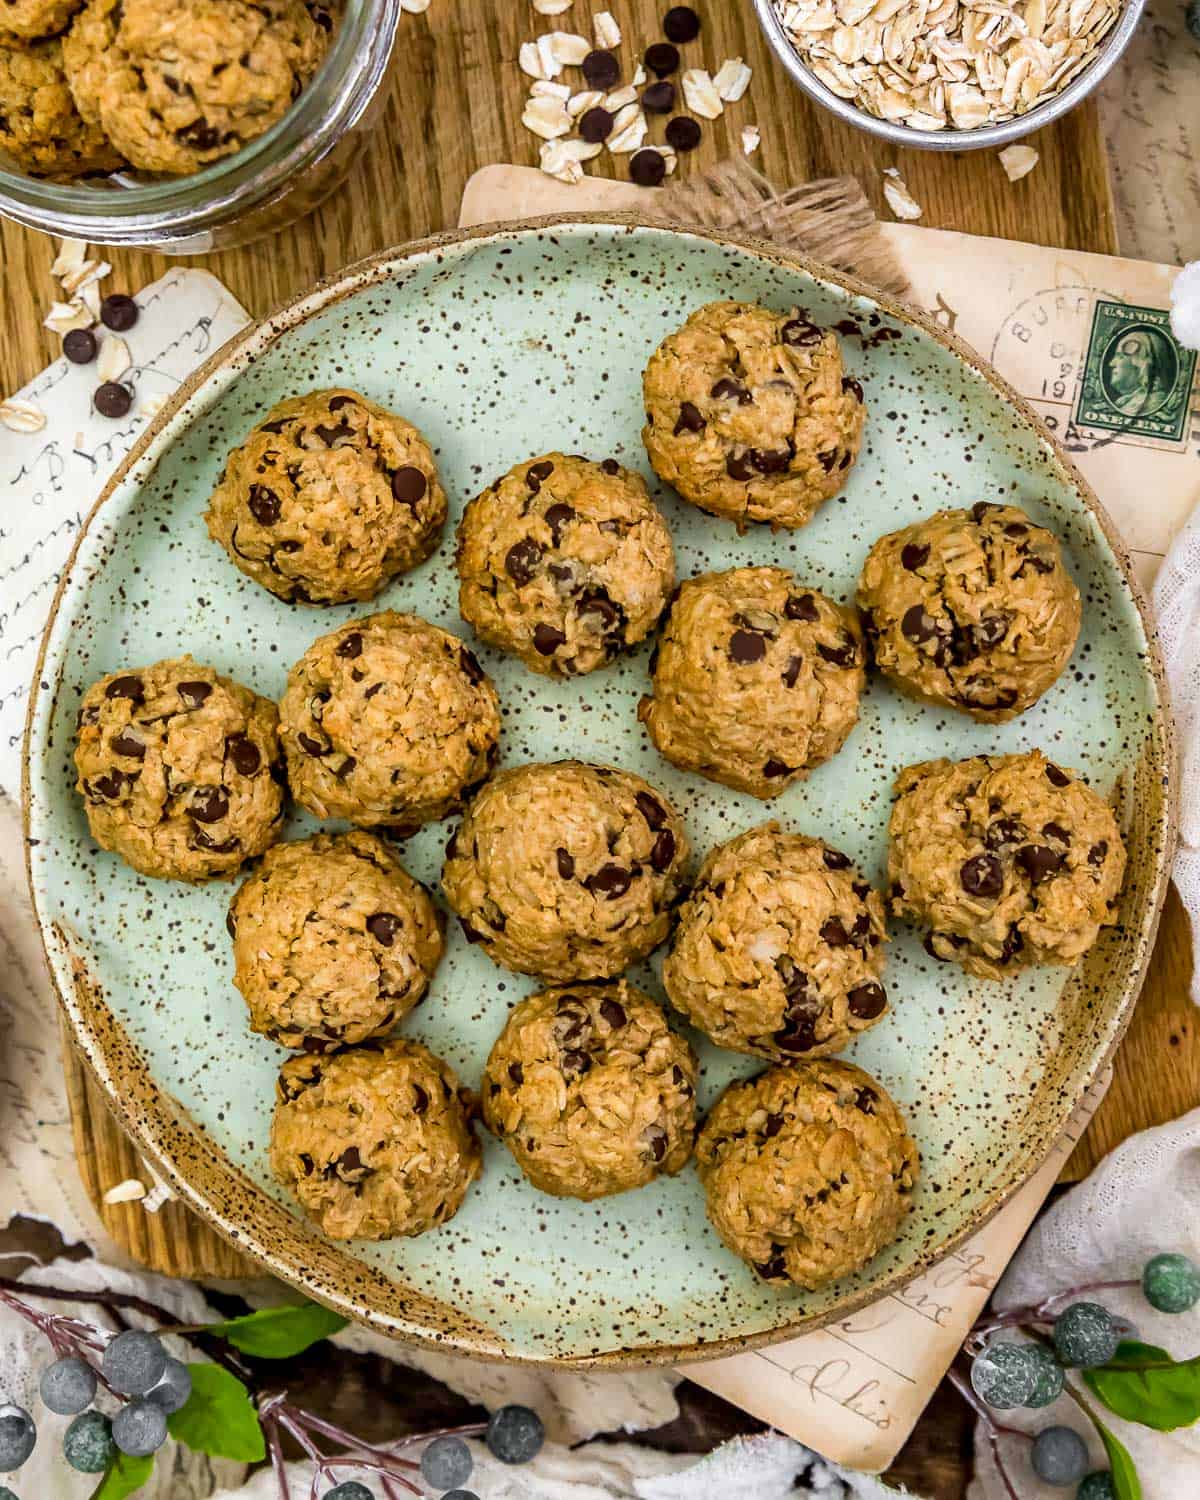 Easy Vegan Peanut Butter Oatmeal Chocolate Chip Cookies